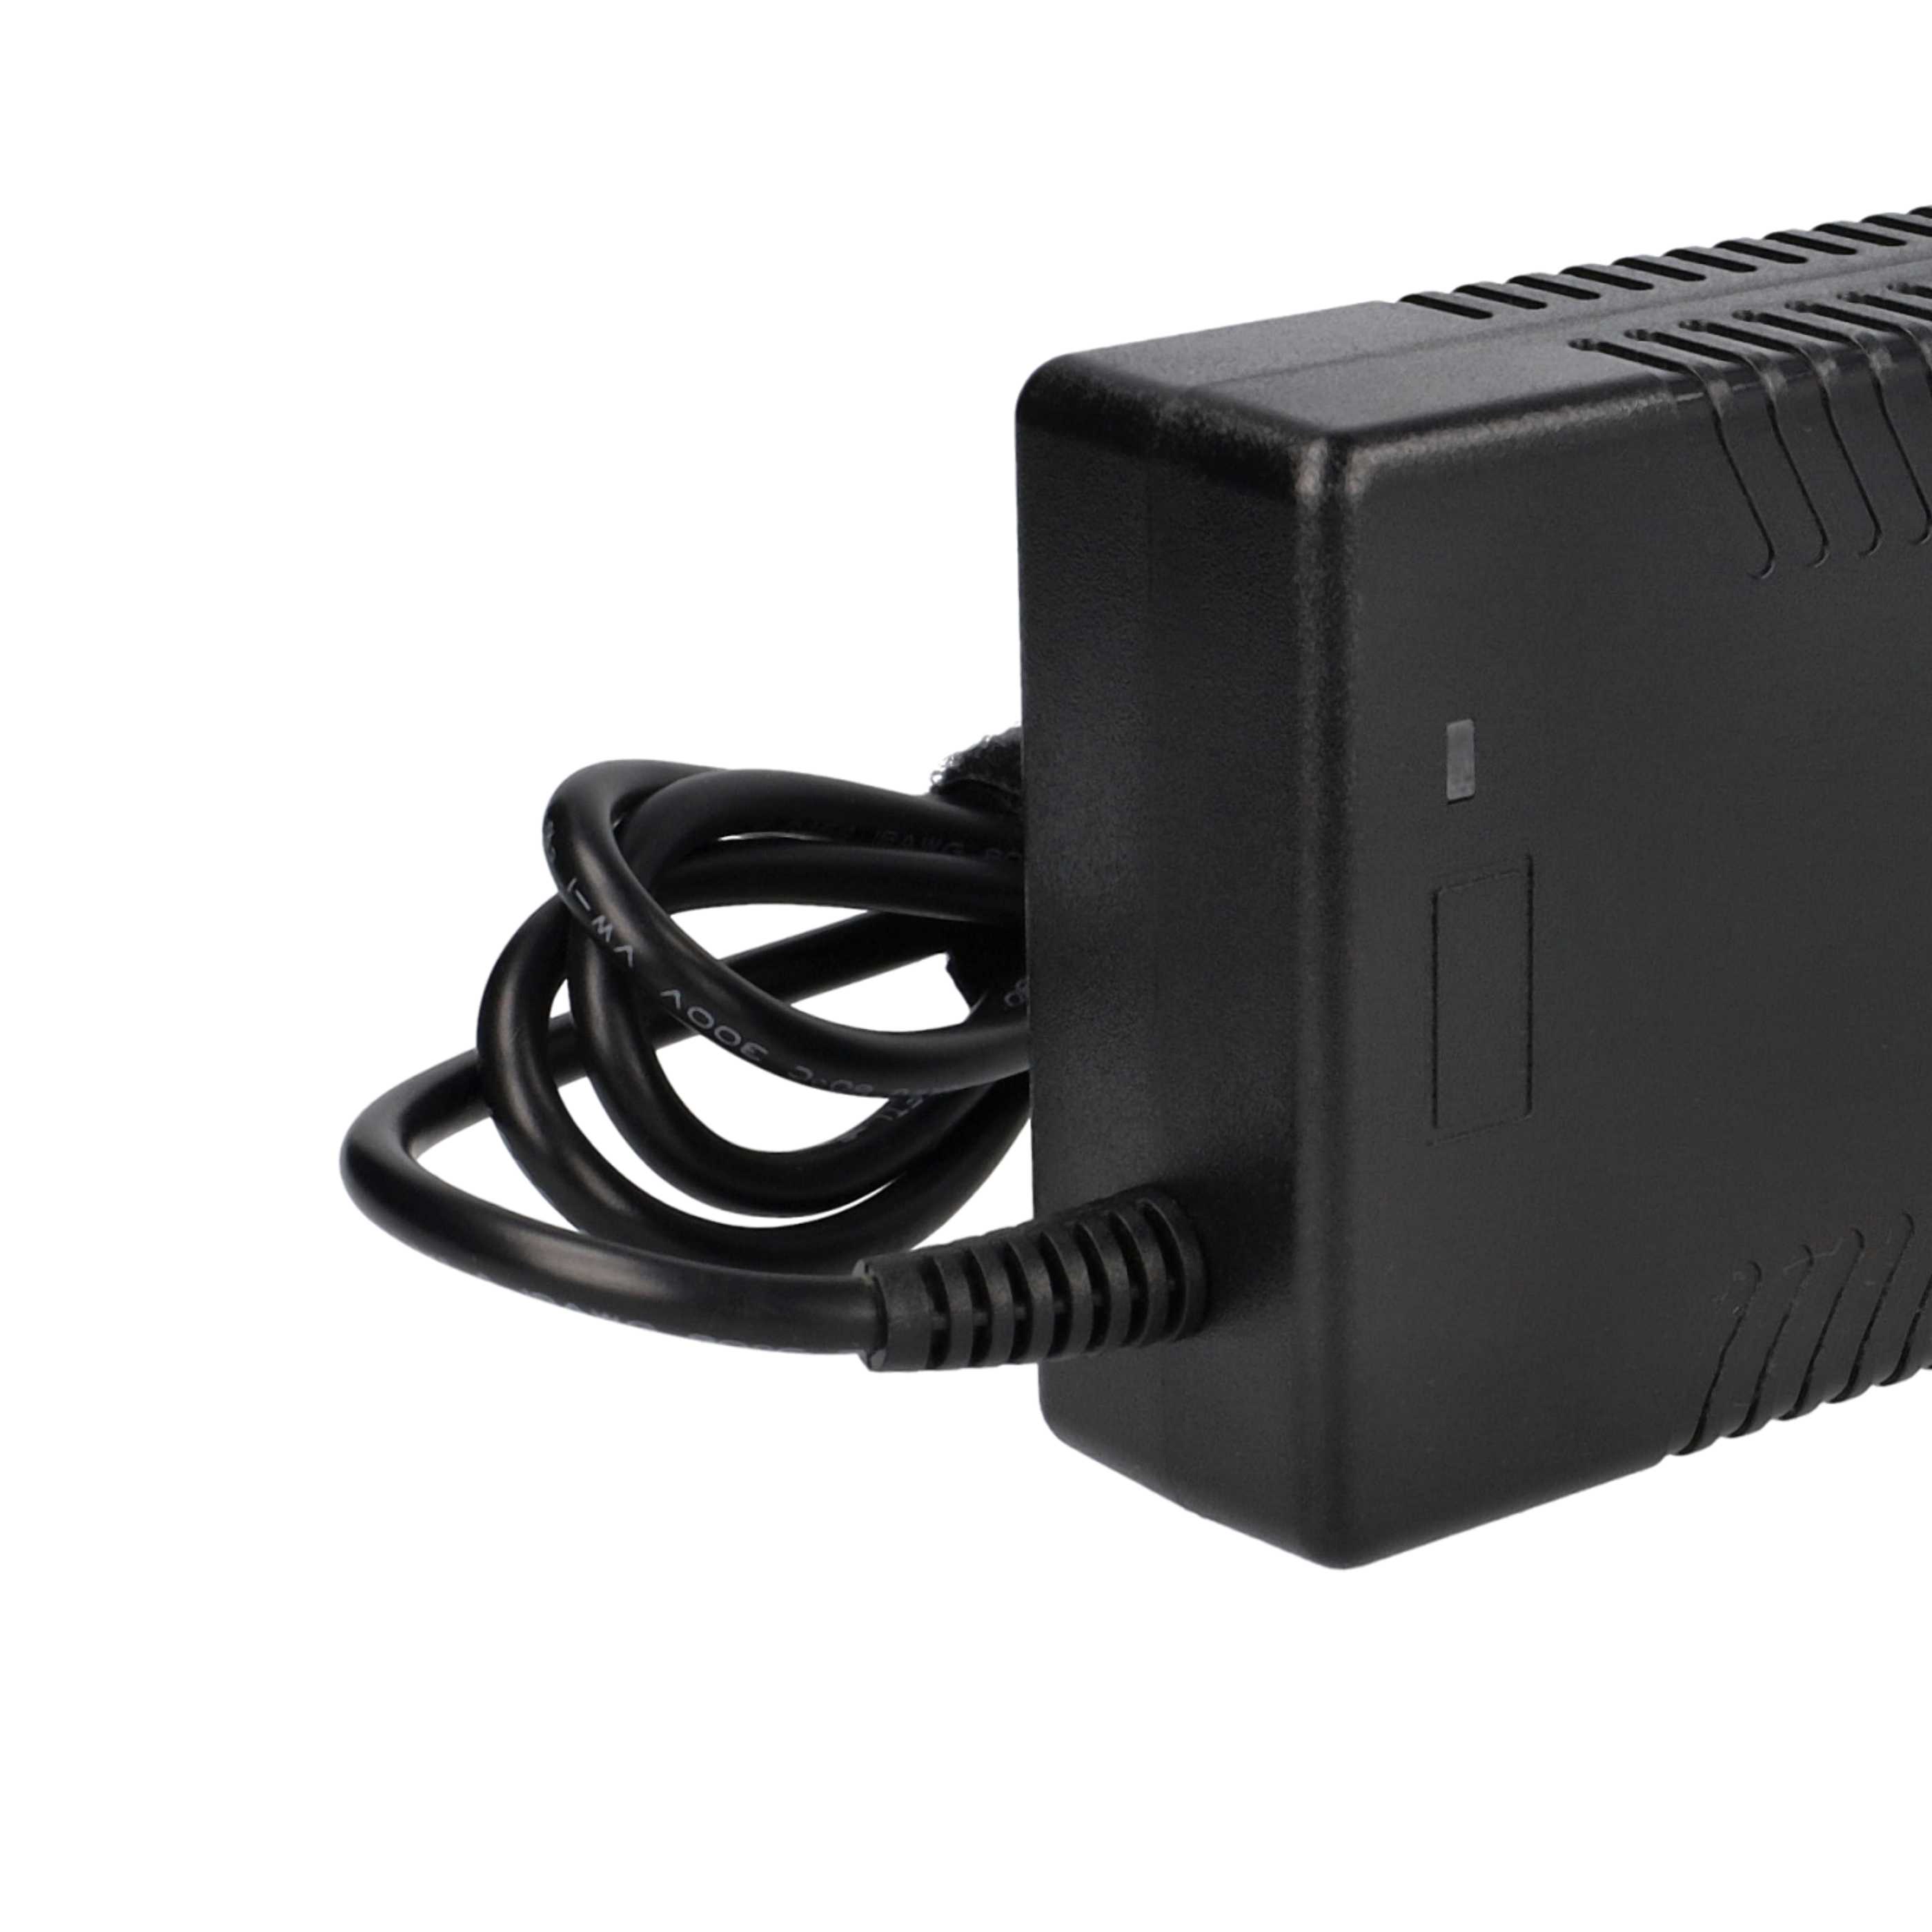 Mains Power Adapter replaces Dell PA-13, PA-1131-02D for DellNotebook, 131 W